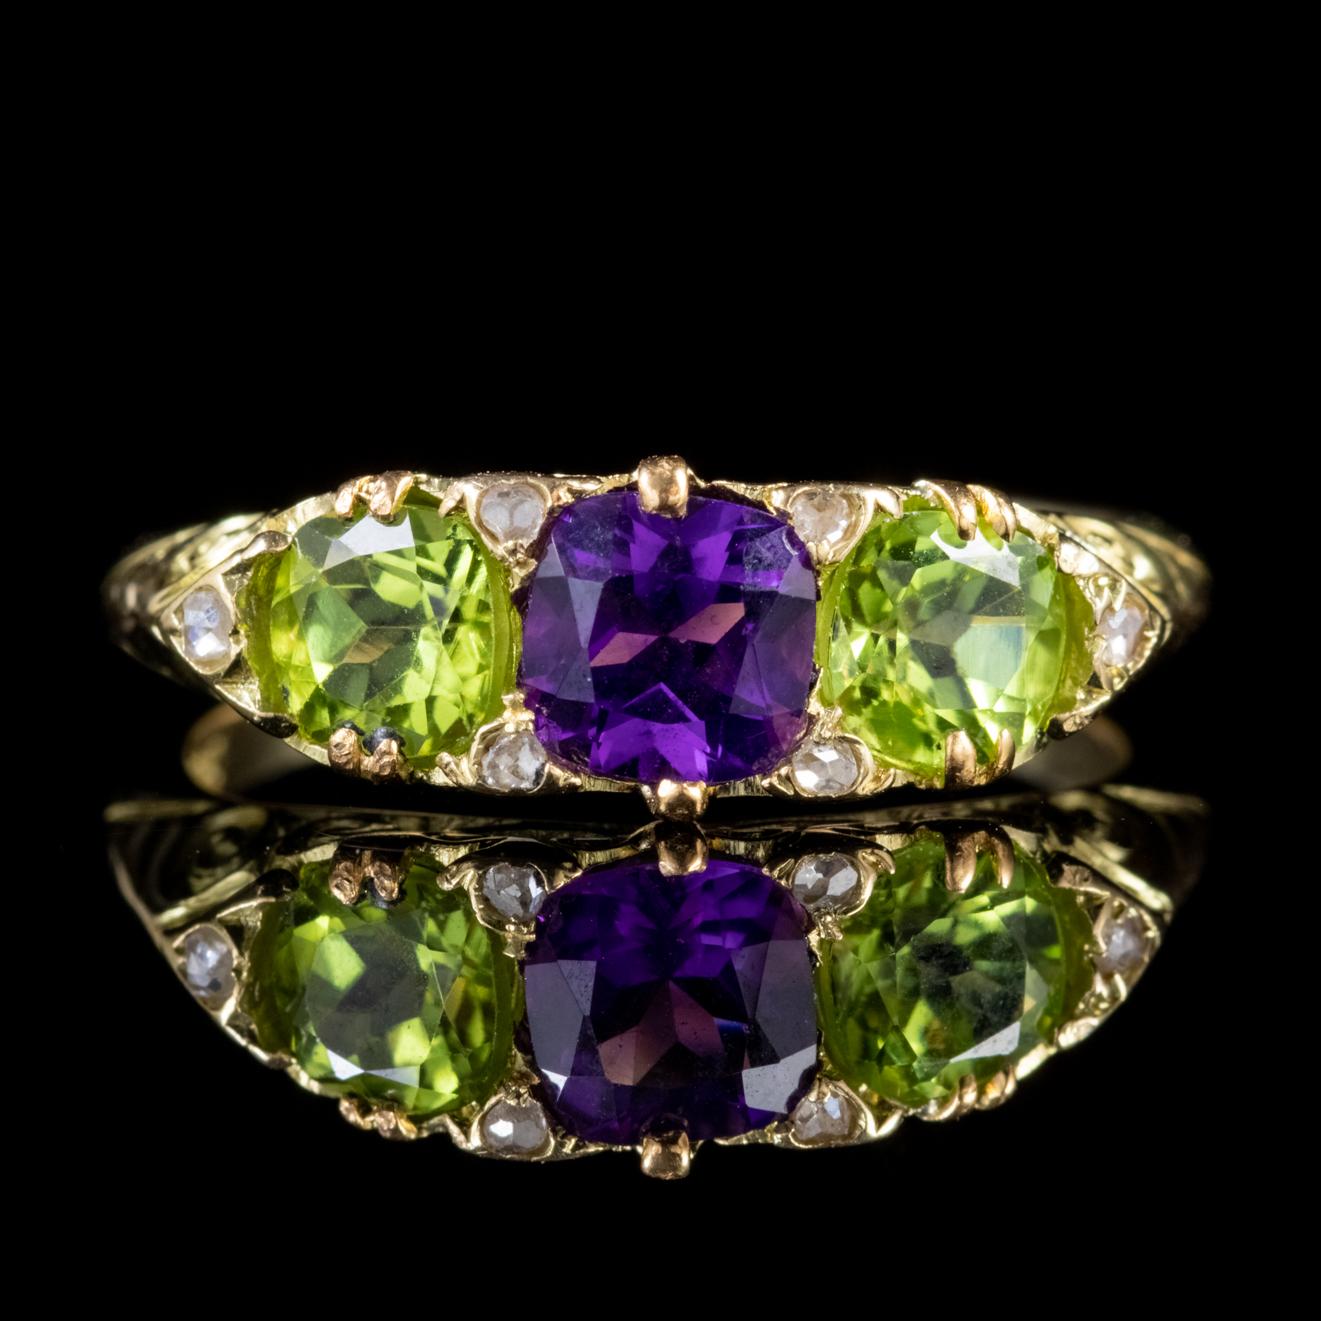 A colourful Antique Suffragette ring made during the Edwardian era Circa 1915. The face of the ring is set with a fabulous approx. 0.75ct Amethyst flanked by two 0.60ct Peridots with six twinkling Diamonds set in-between. 

Suffragette jewellery was